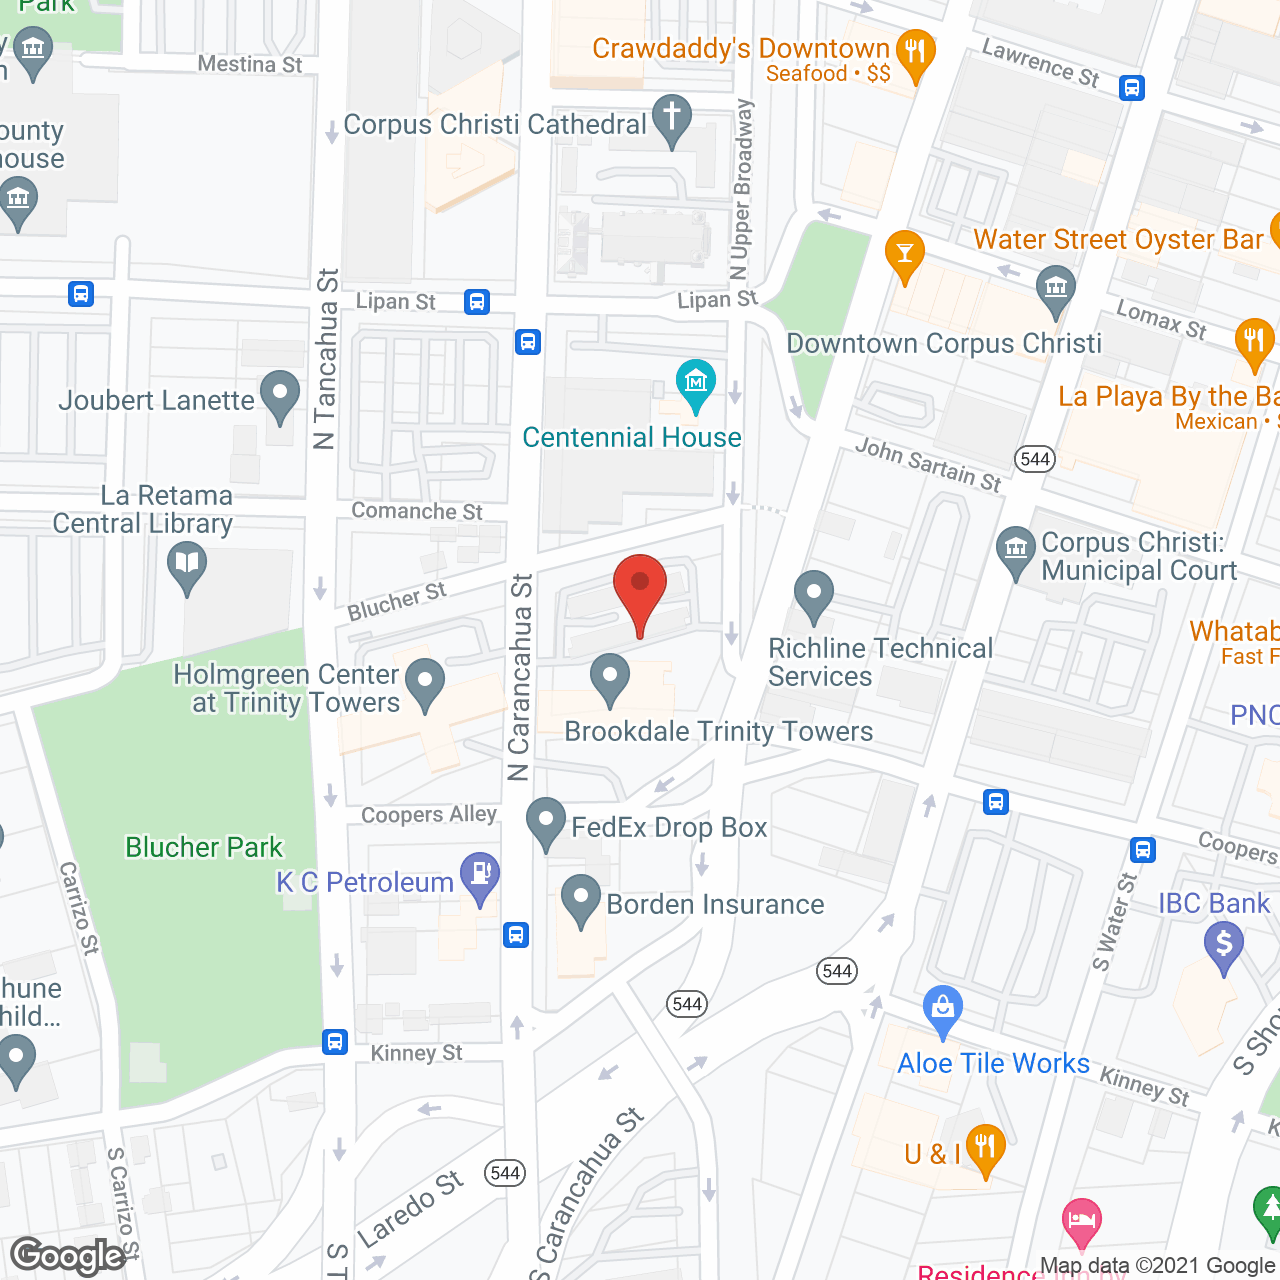 Brookdale Trinity Towers in google map